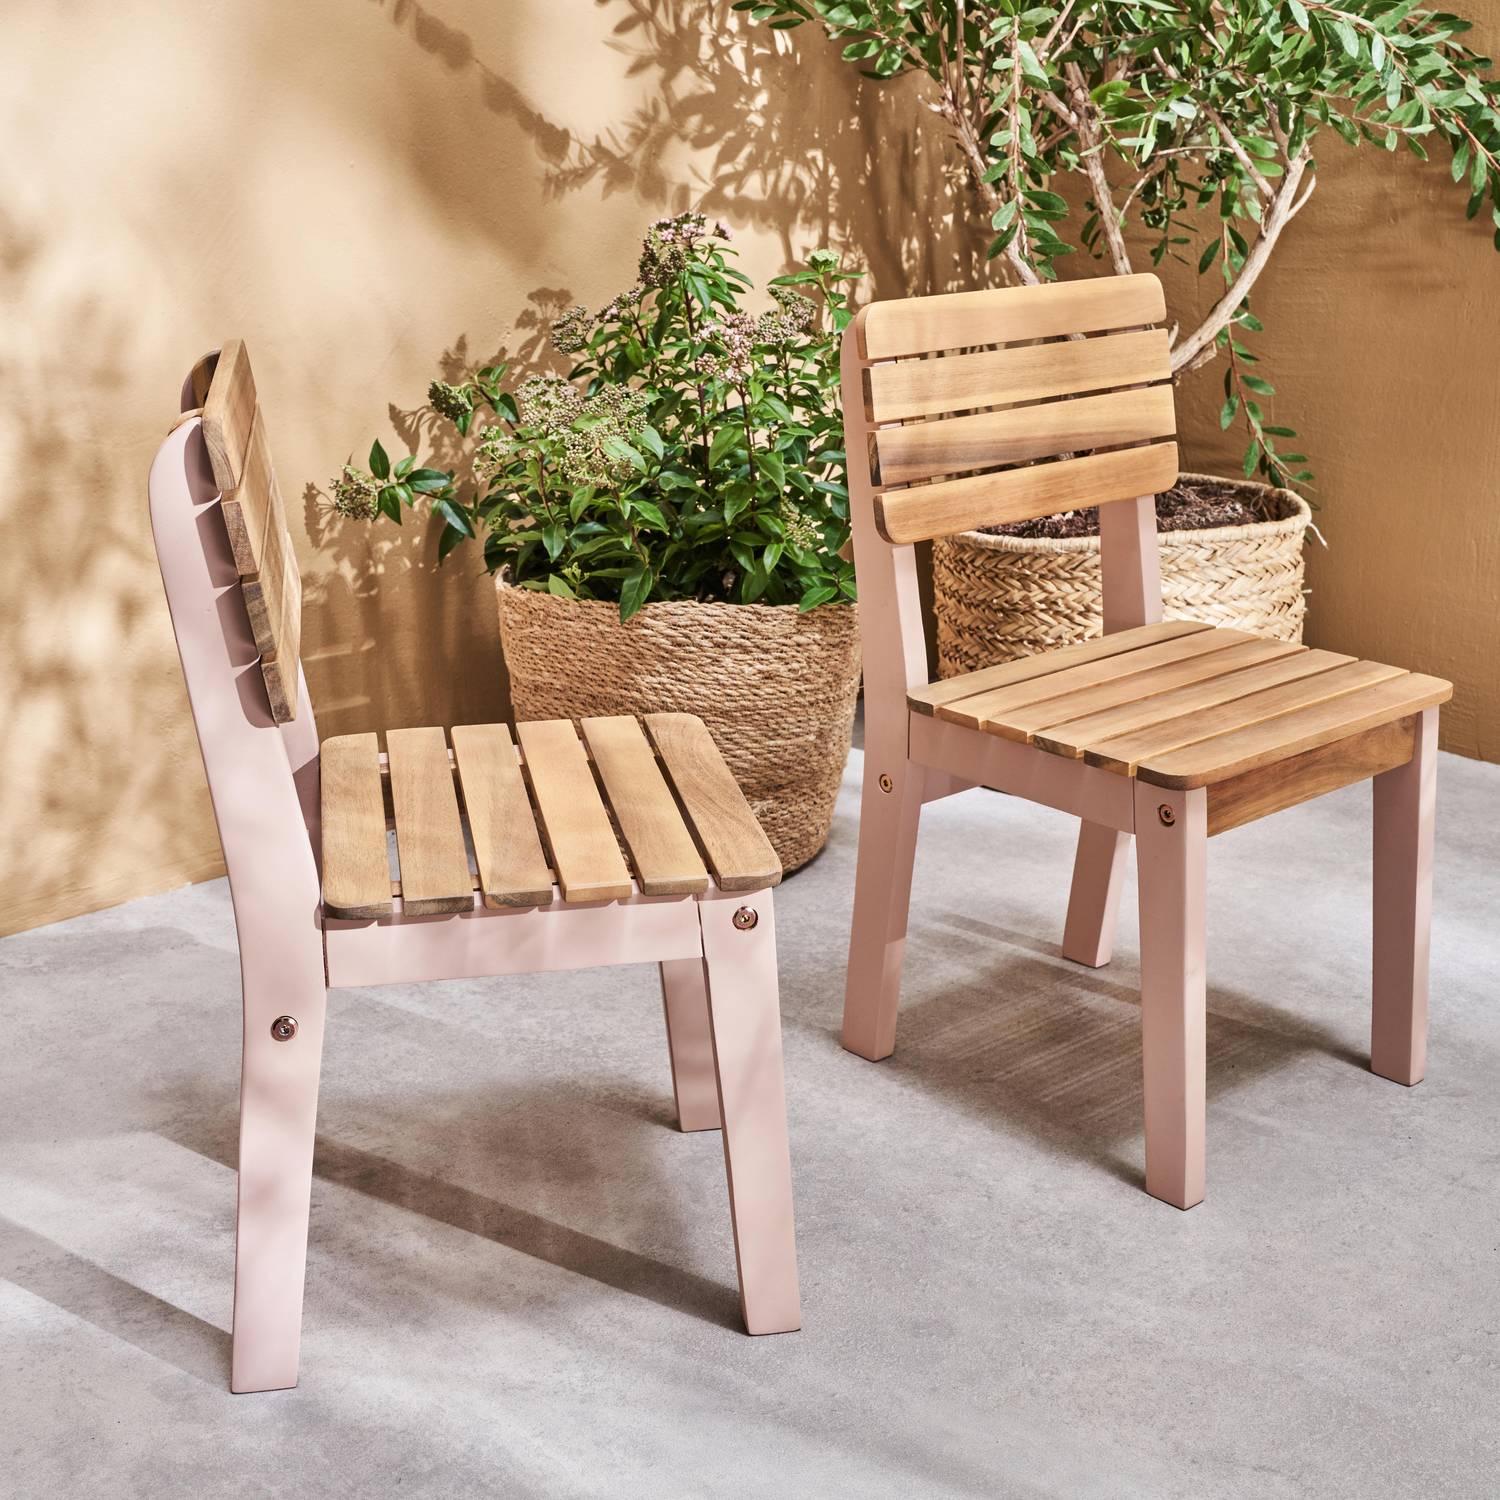 Solid Wood Chairs for Children, Indoor/Outdoor (Set of 2), pink, L29 x D31.5 x H53 cm Photo1